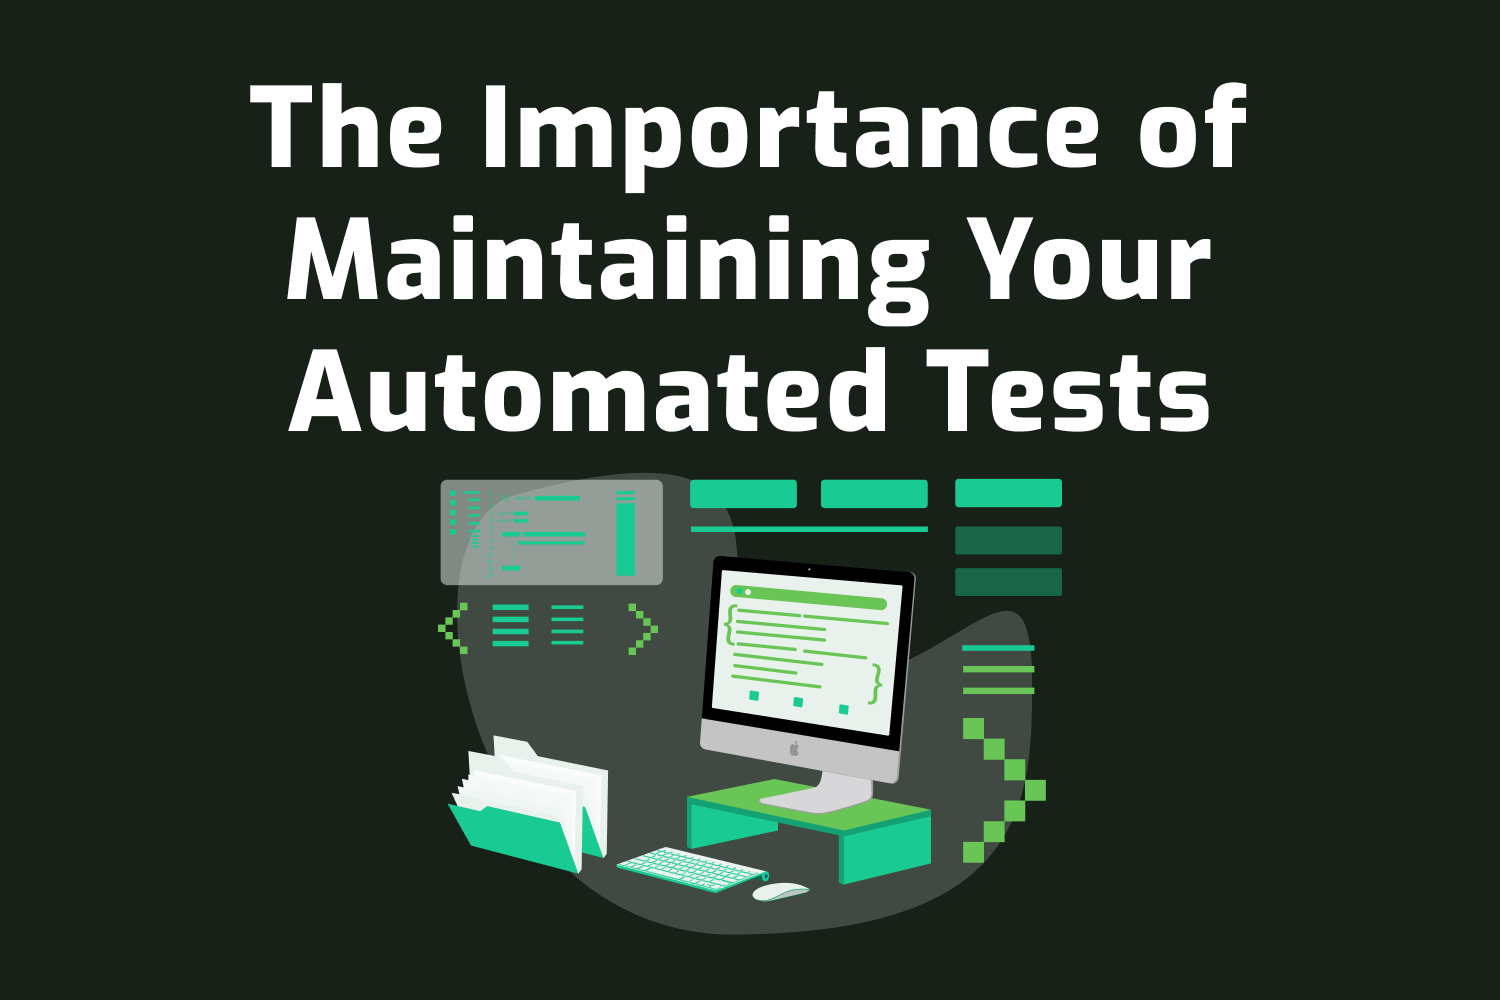 The Importance of Maintaining Your Automated Tests